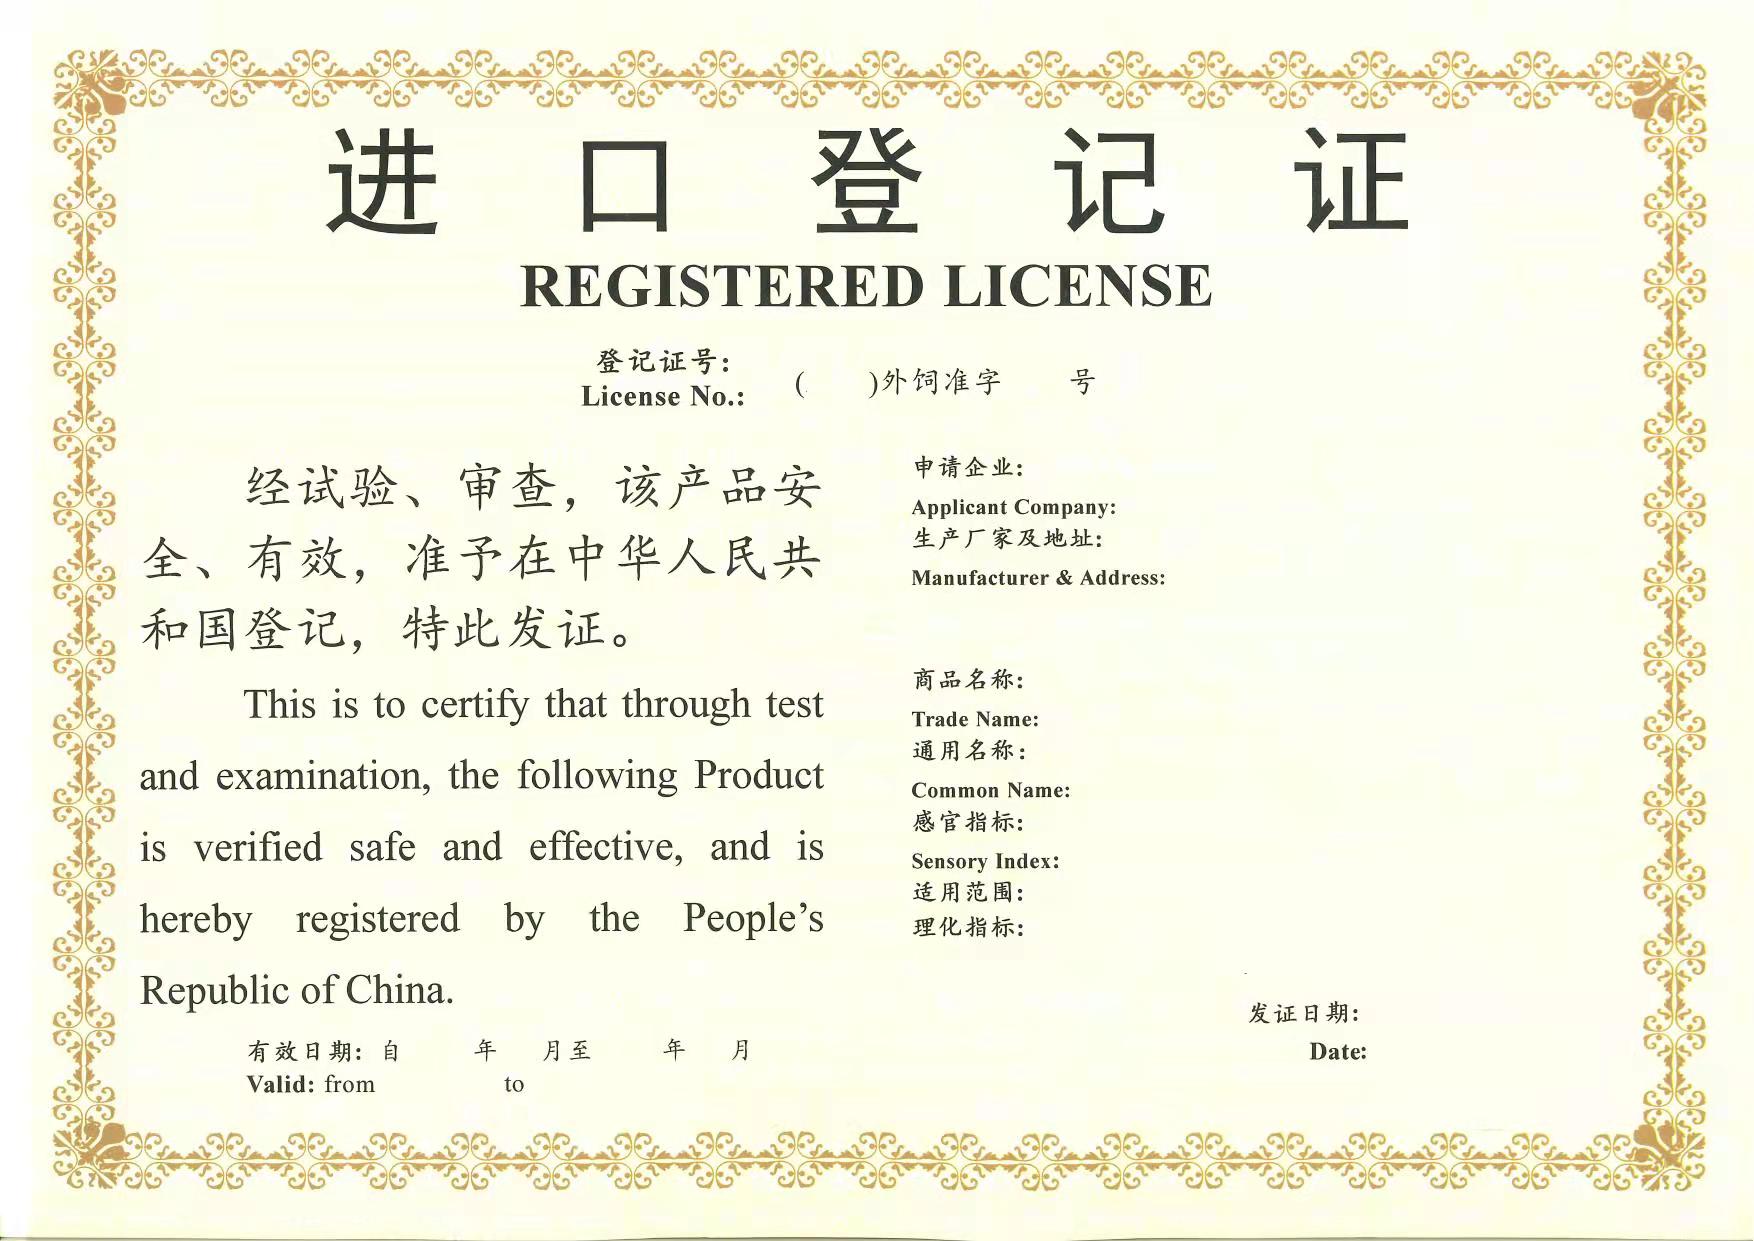 Our company successfully completed the MARA registered license for overseas enterprises 2020-03